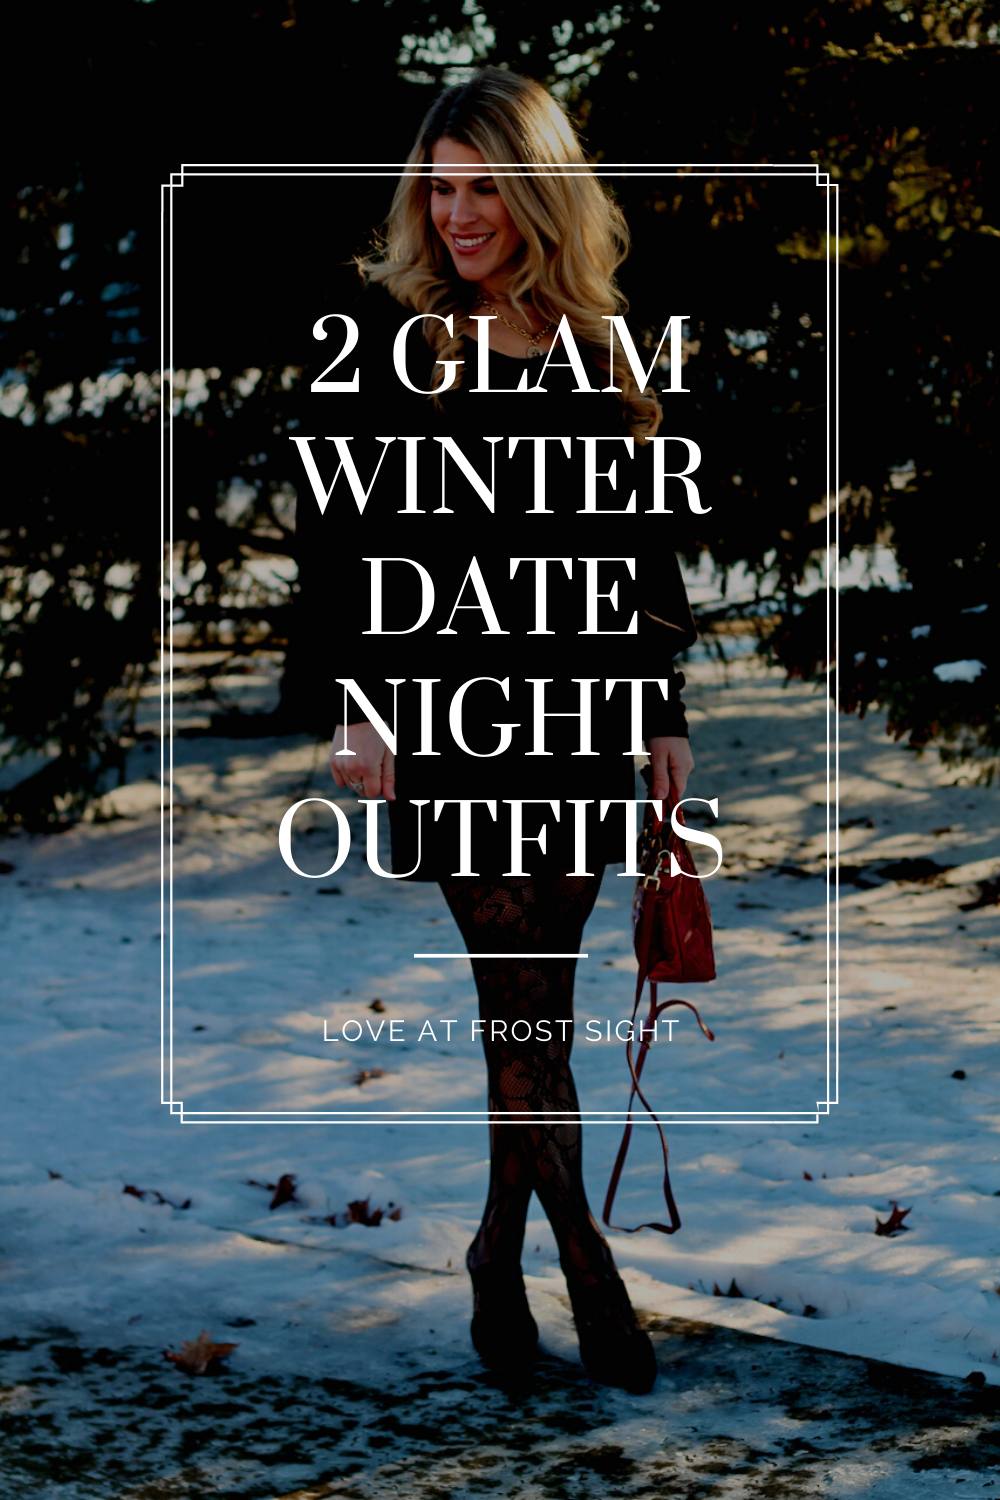 Love At Frost Sight: 2 Glam Winter Date Night Outfits